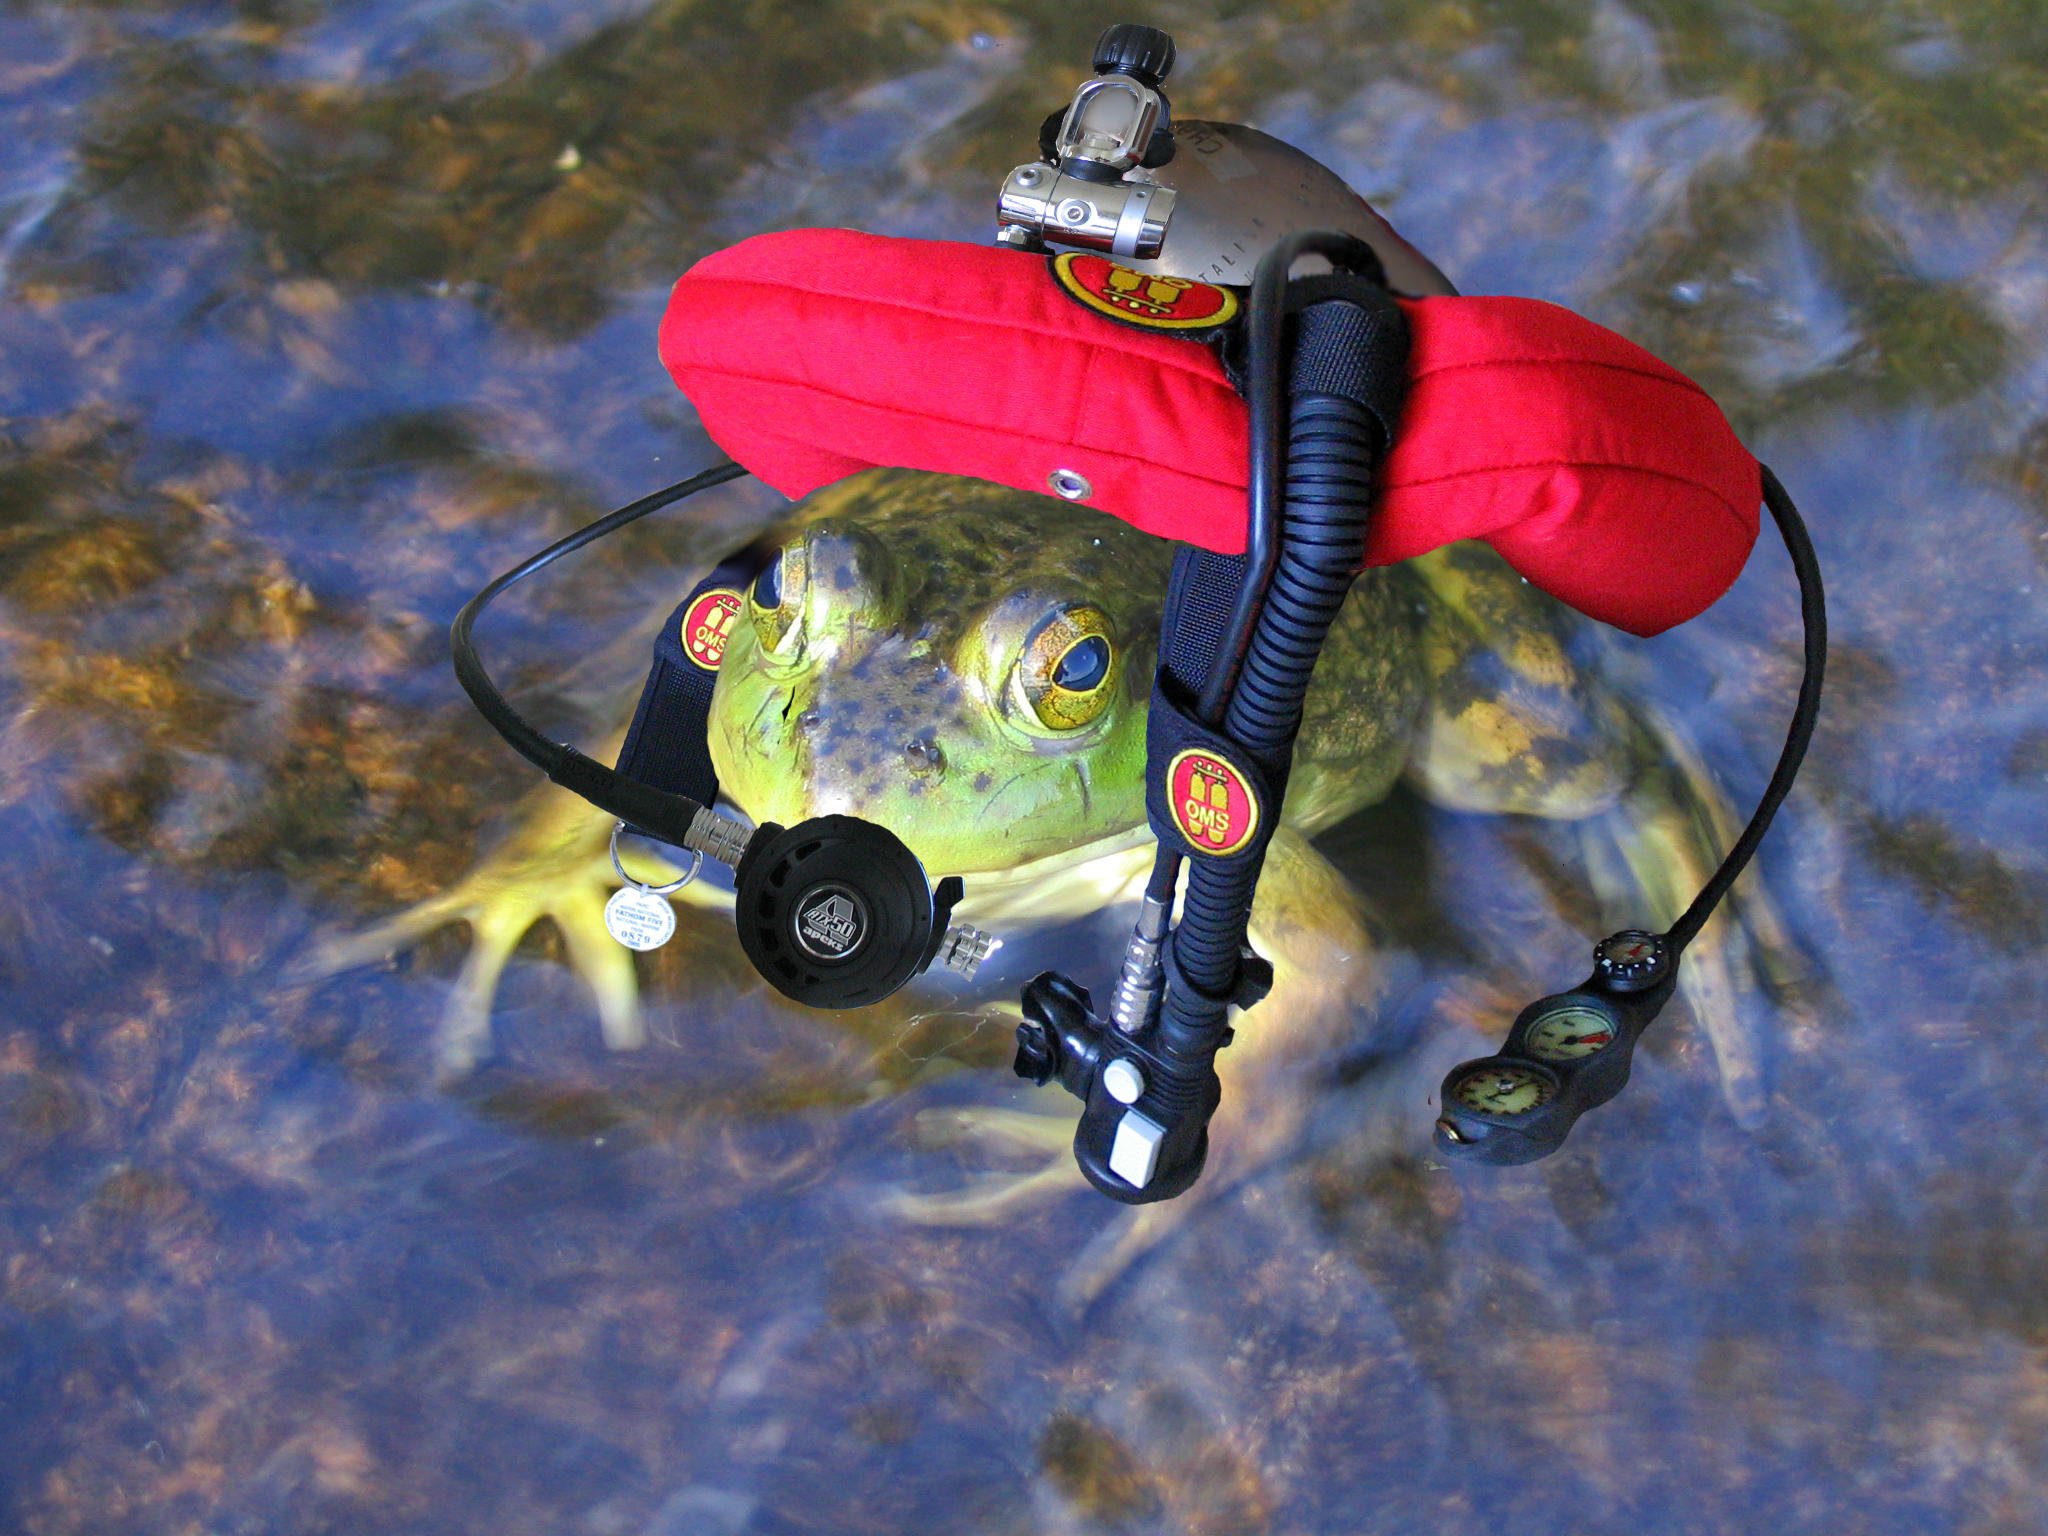 Frog stole my rig.